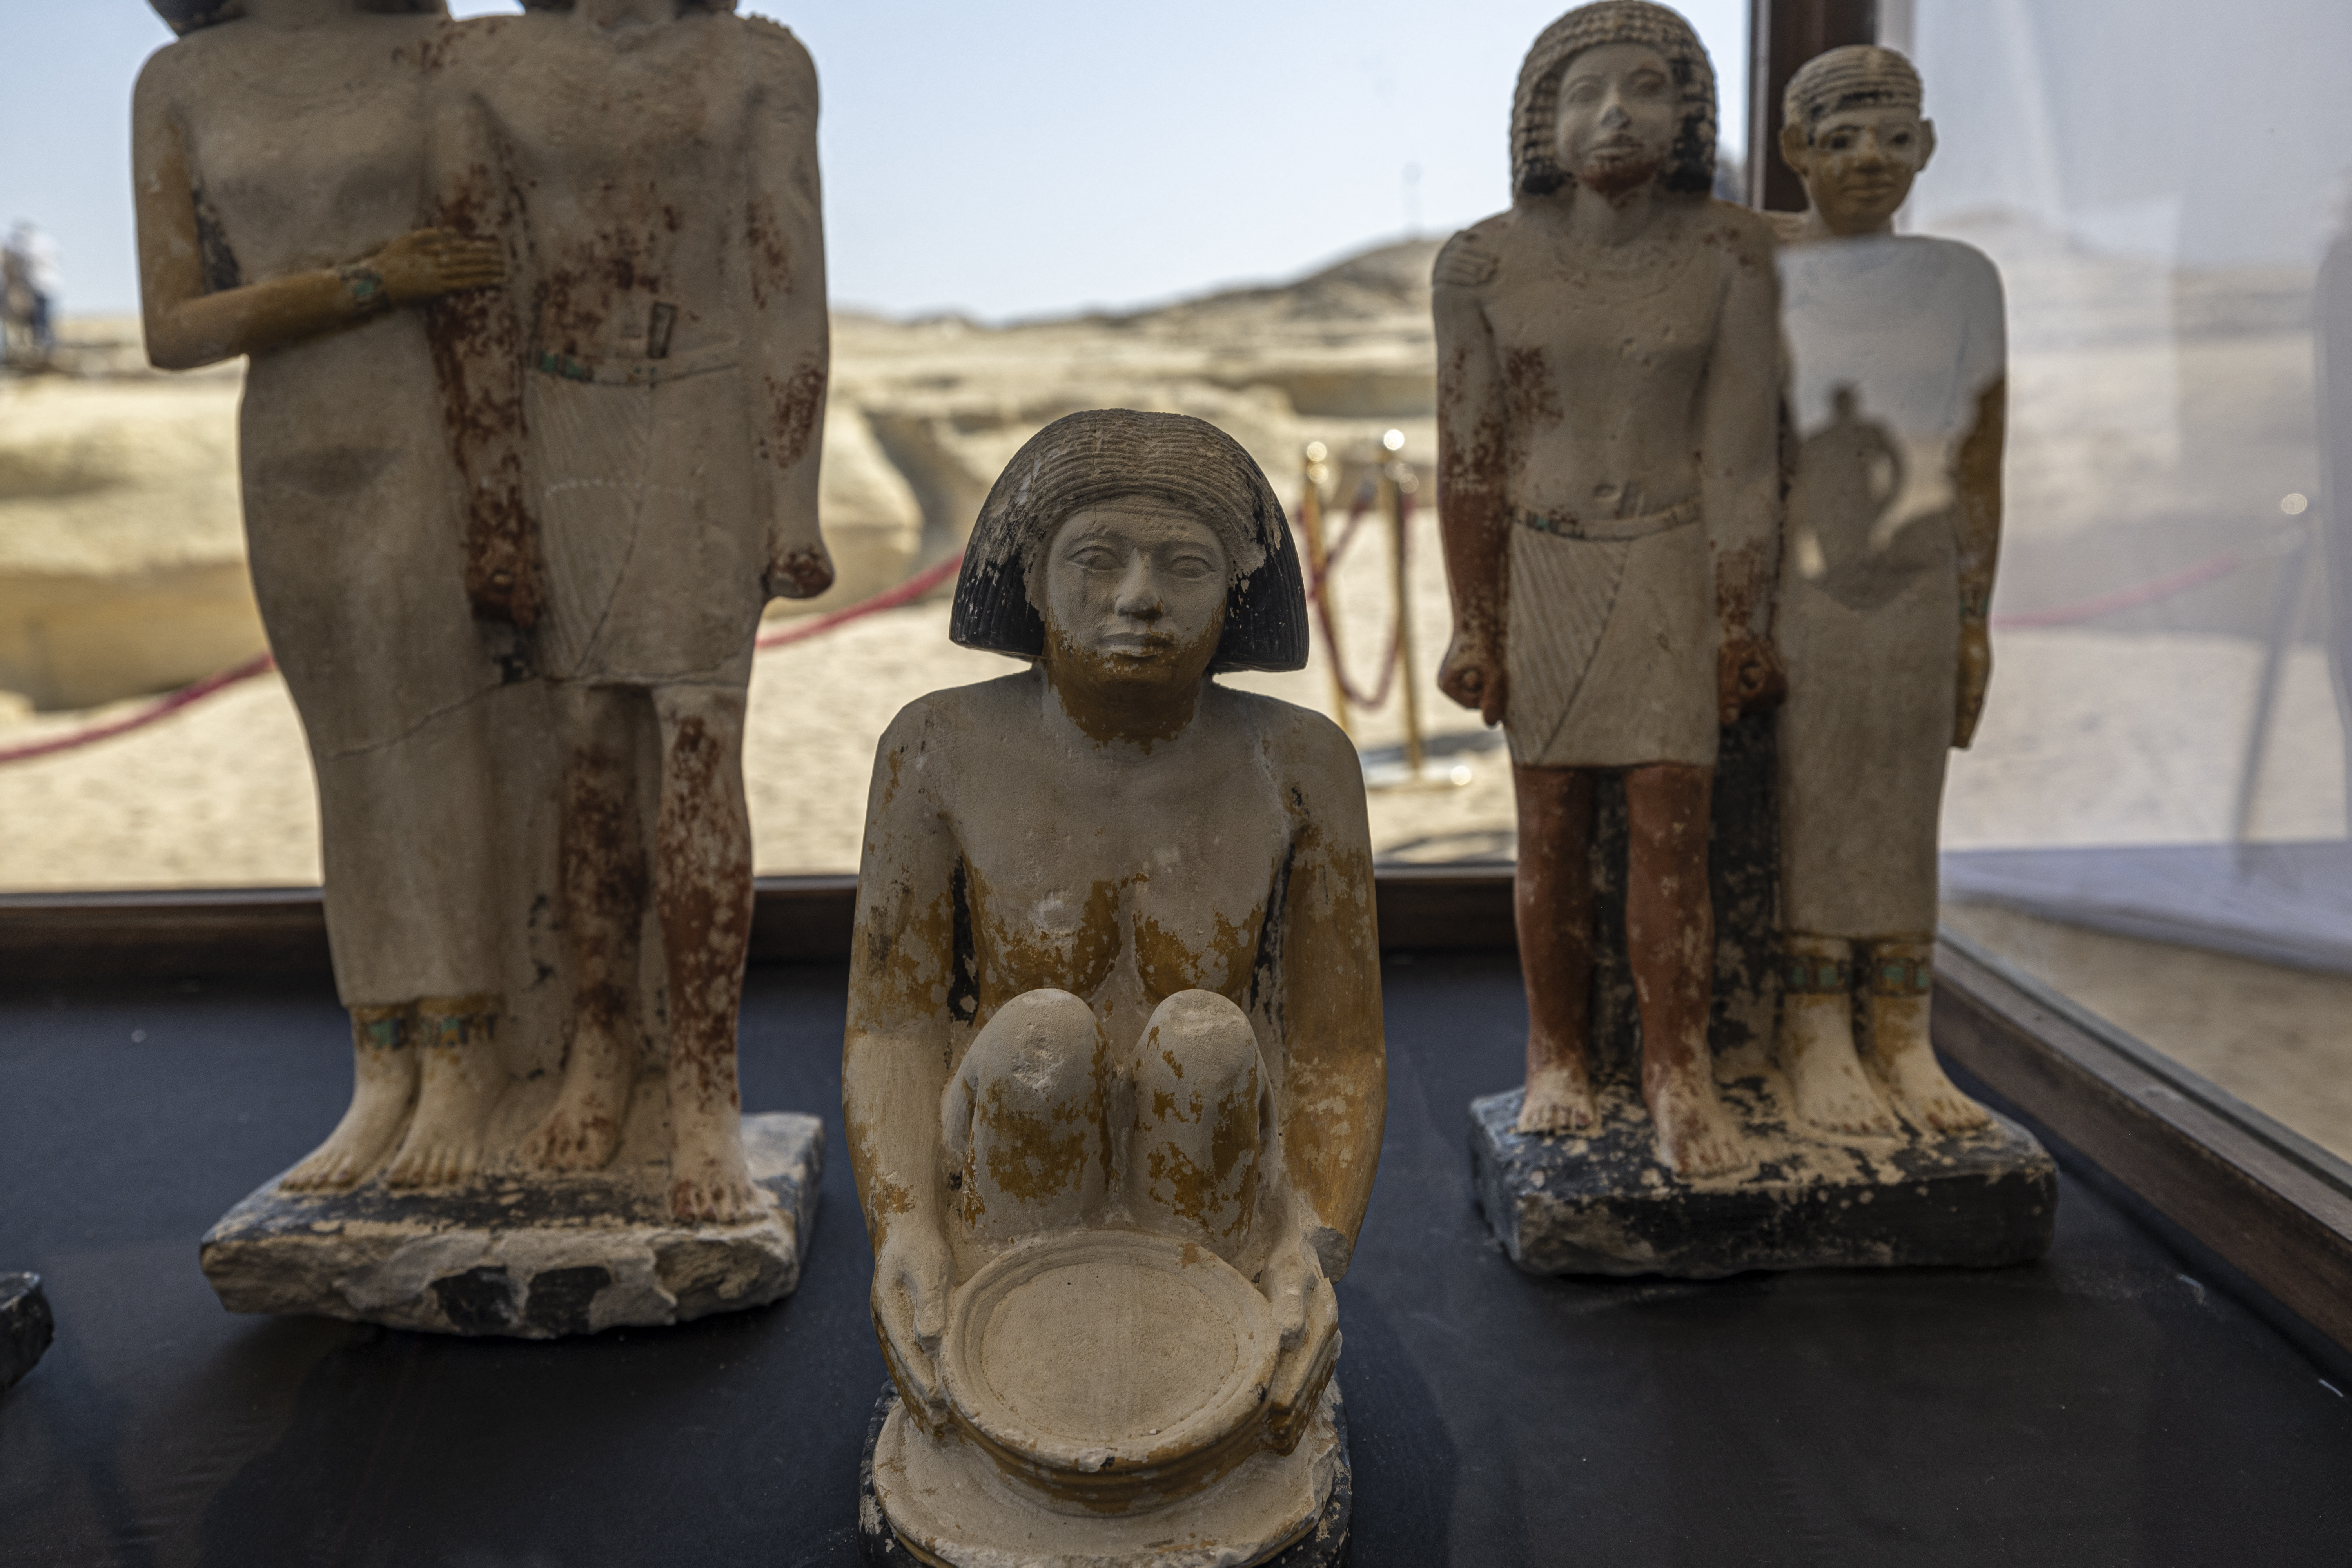 Artifacts are displayed at the Saqqara archaeological site, south of Cairo on January 26, 2023. /AFP